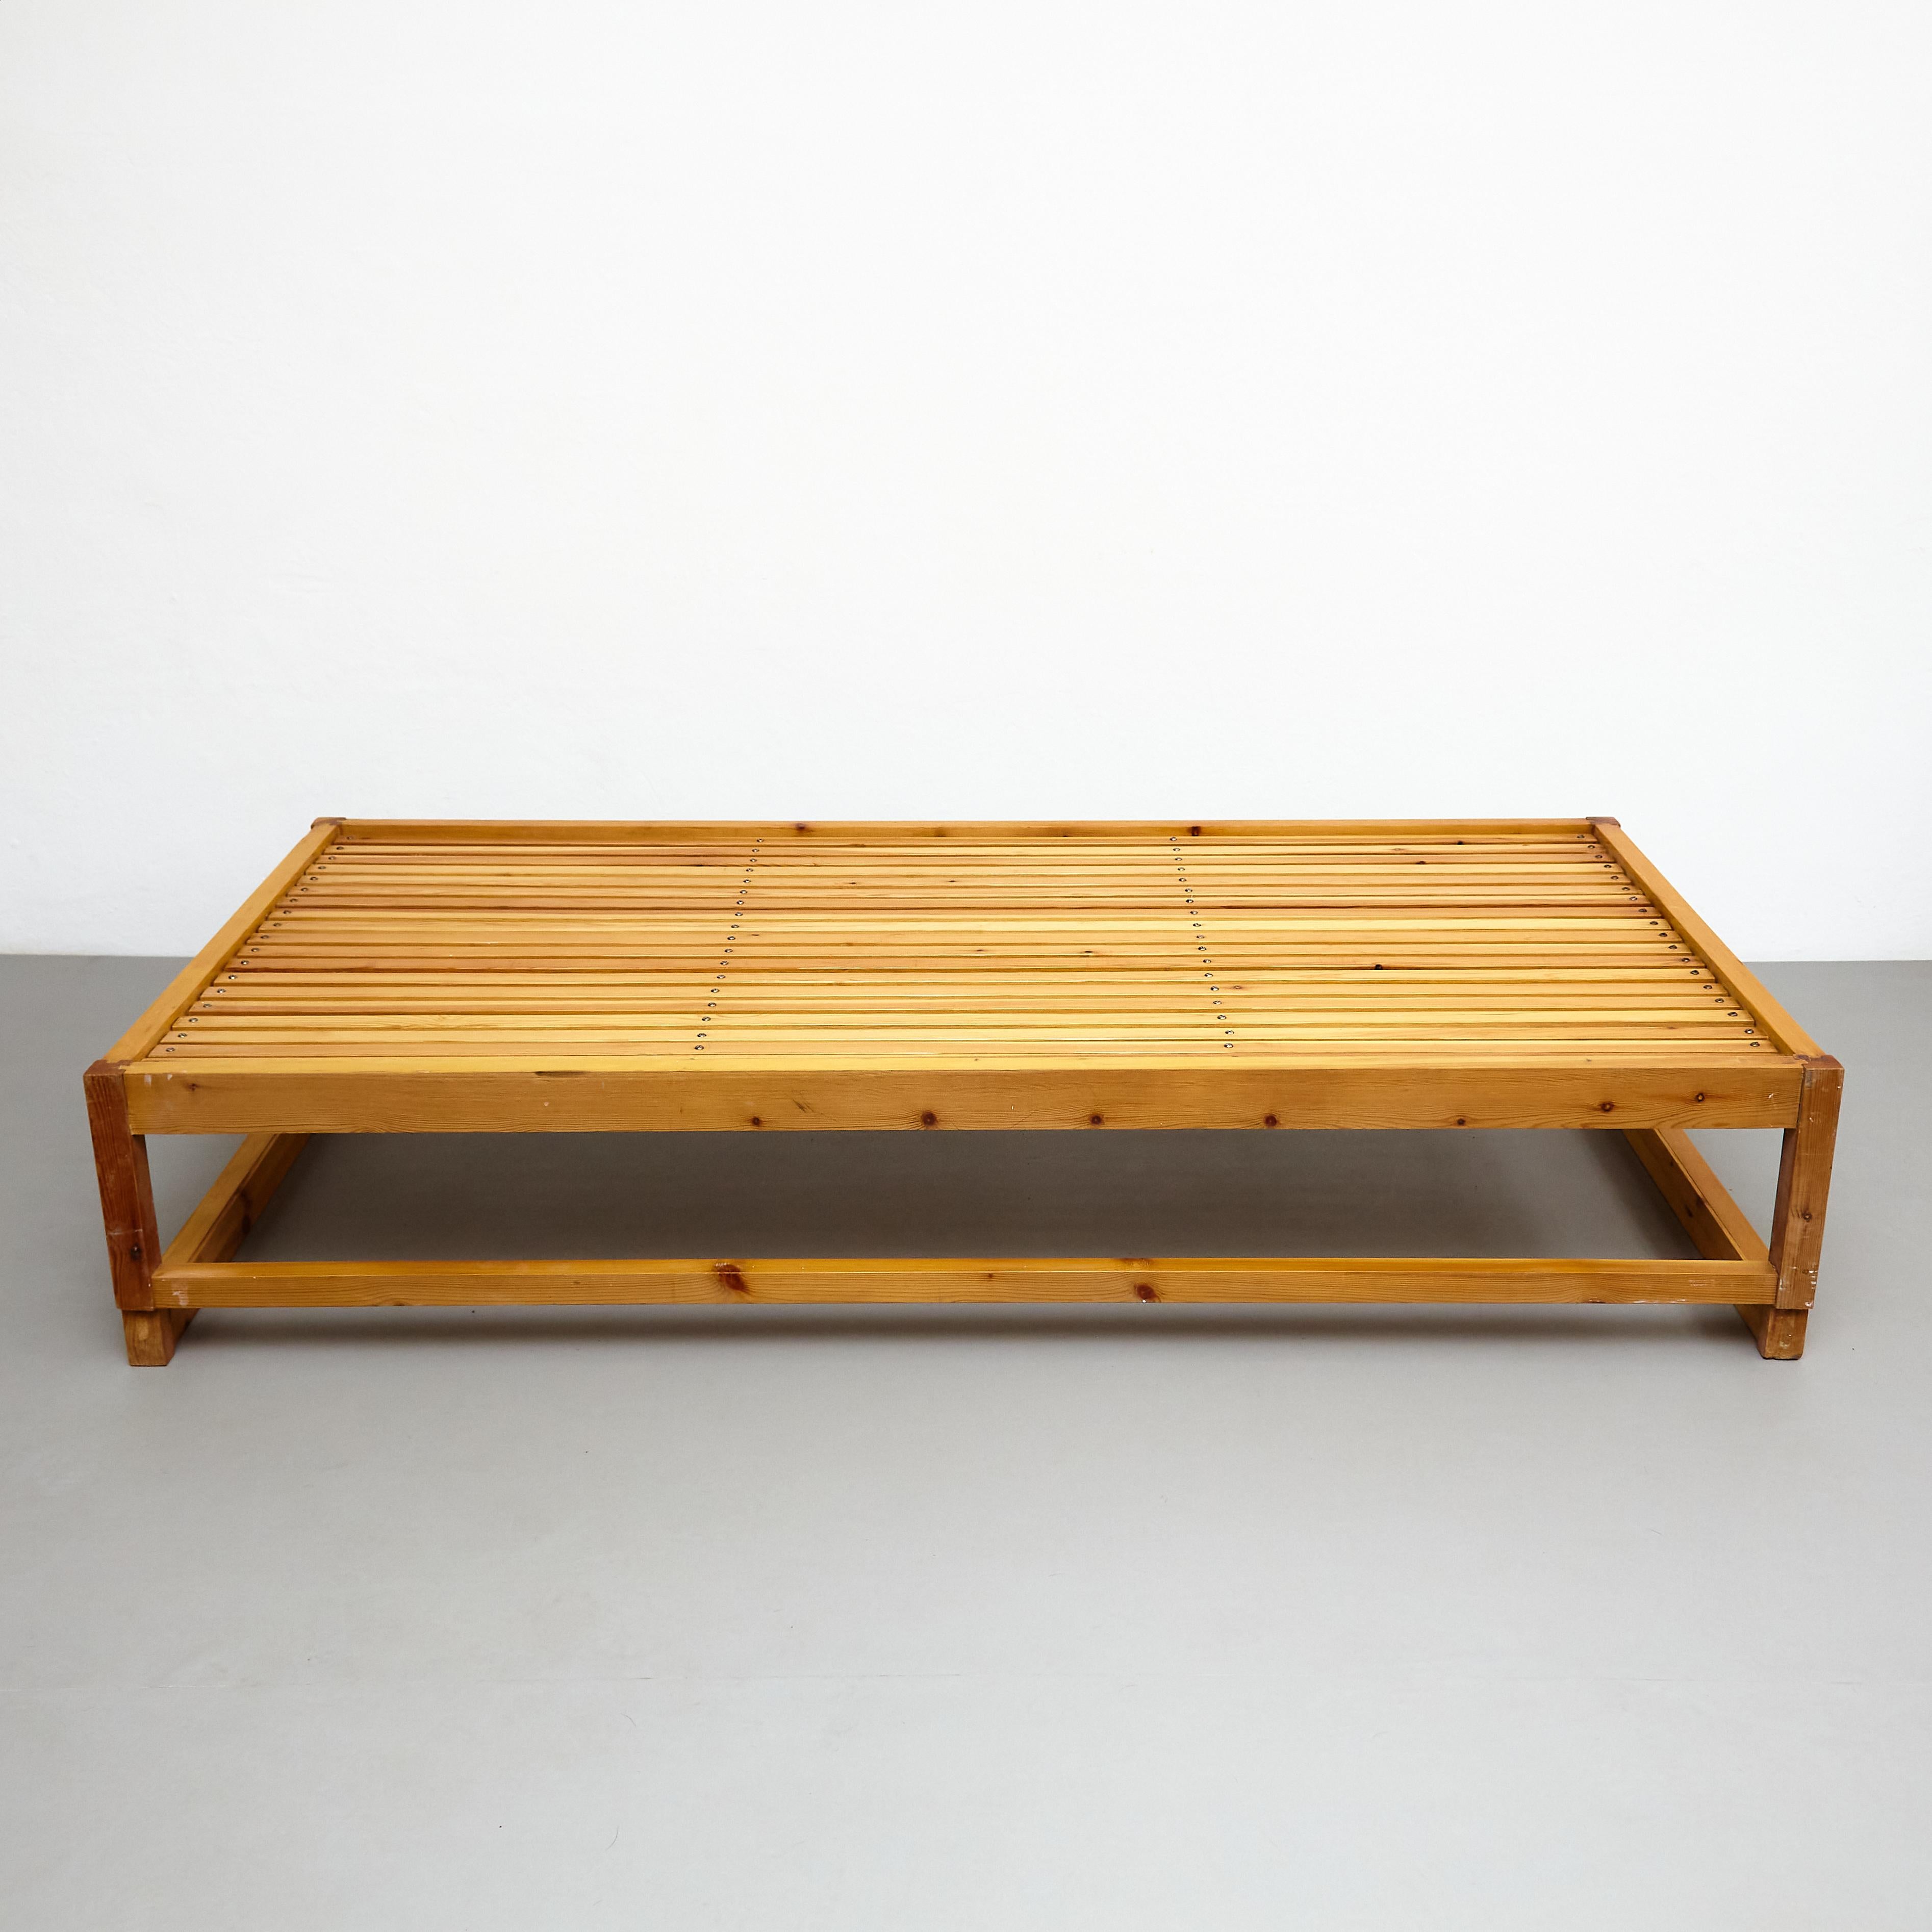 Mid-Century Modern French wood coffee table, by unknown artist.

Manufactured in France, circa 1950.

In original condition with minor wear consistent of age and use, preserving a beautiful patina.

Materials: 
Wood 

Dimensions: 
D 102.5